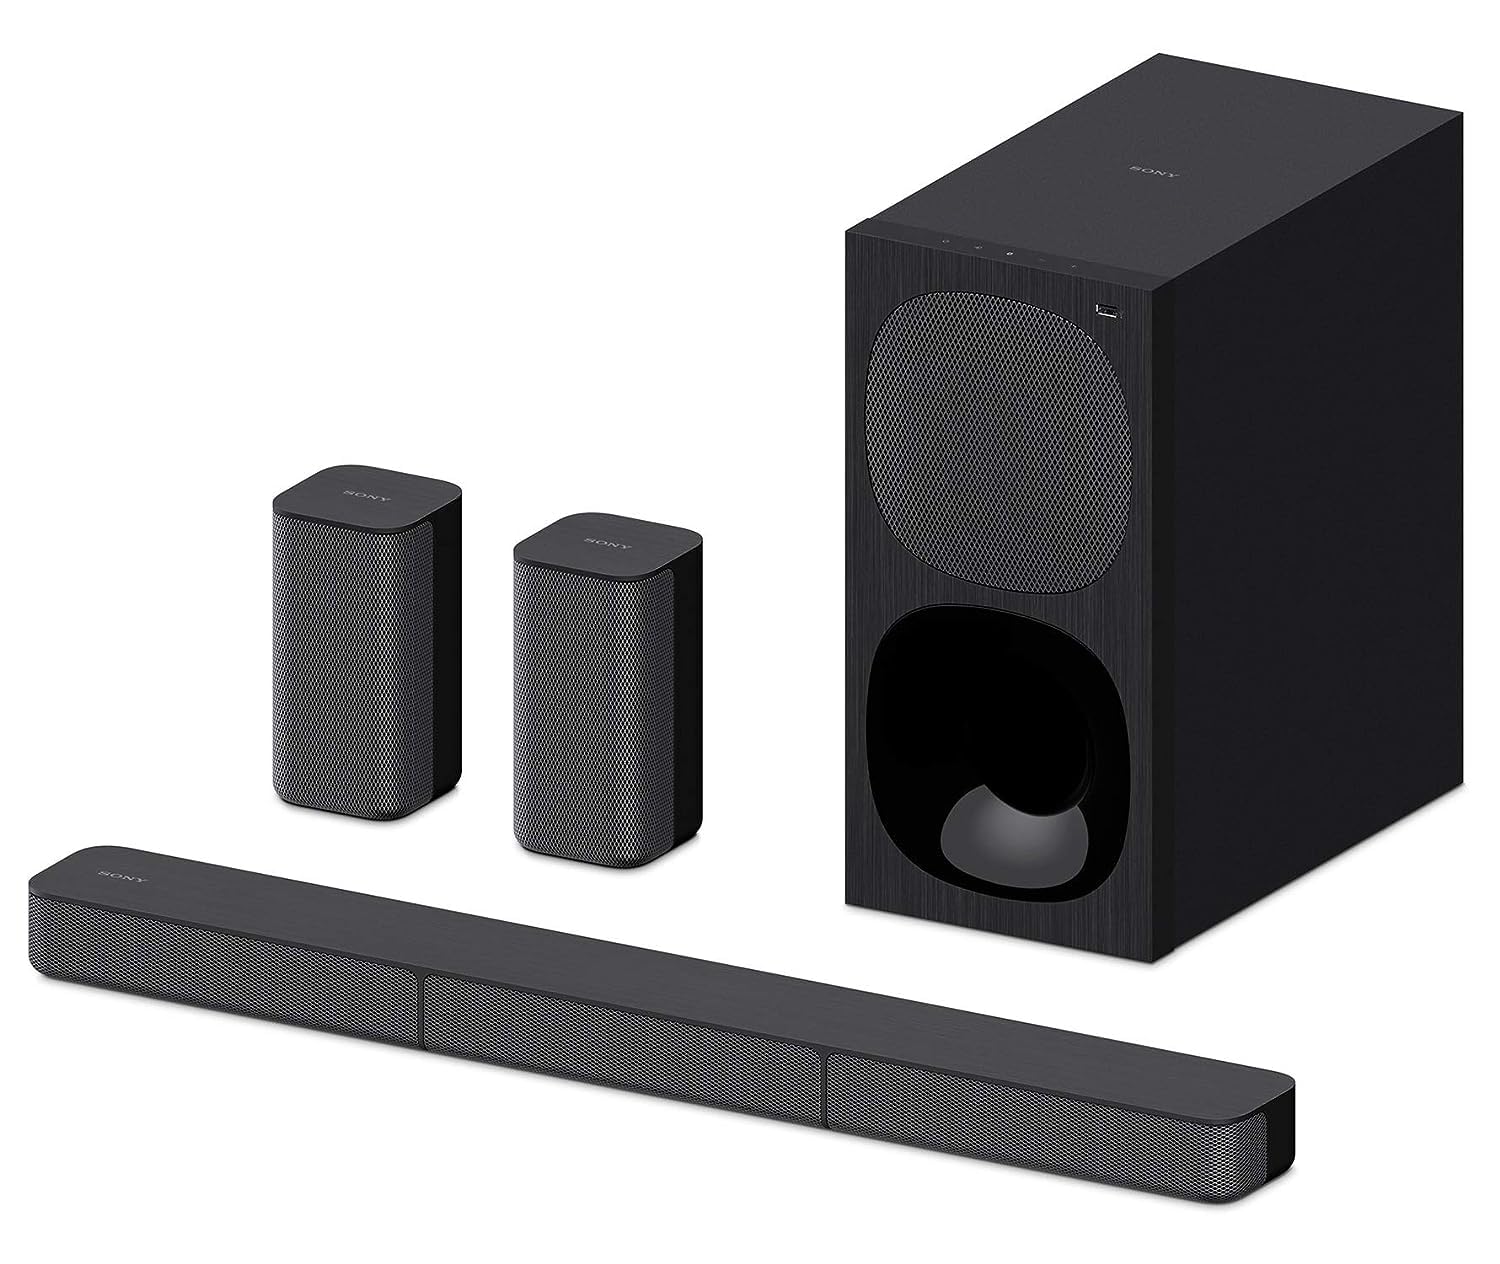 Sony 5.1ch Dolby Digital Soundbar for TV with subwoofer and Compact Rear Speakers